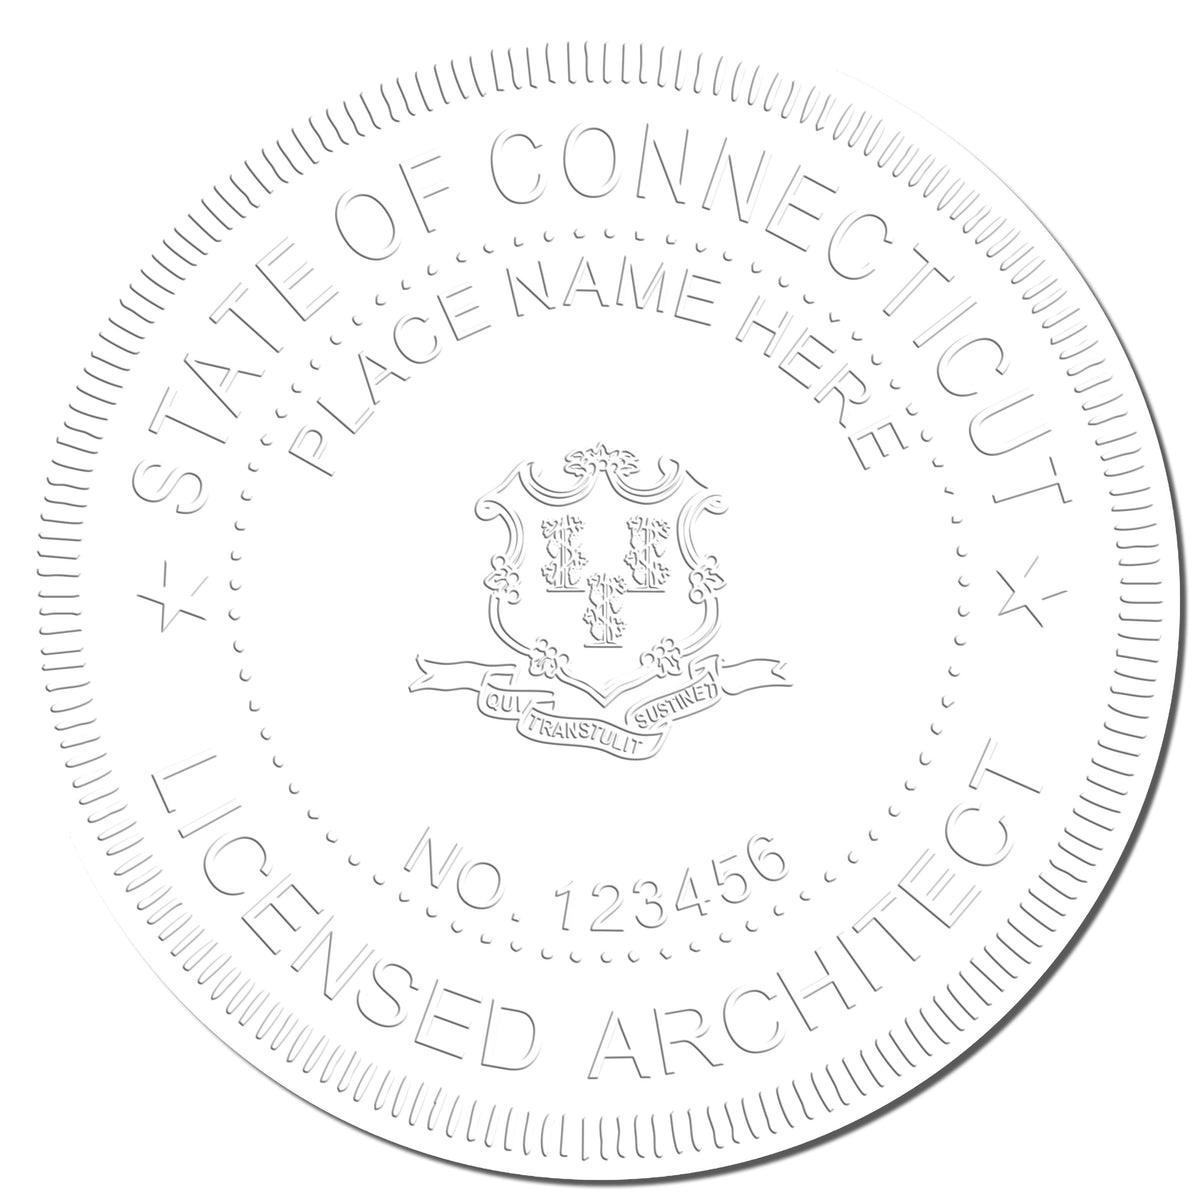 This paper is stamped with a sample imprint of the Gift Connecticut Architect Seal, signifying its quality and reliability.